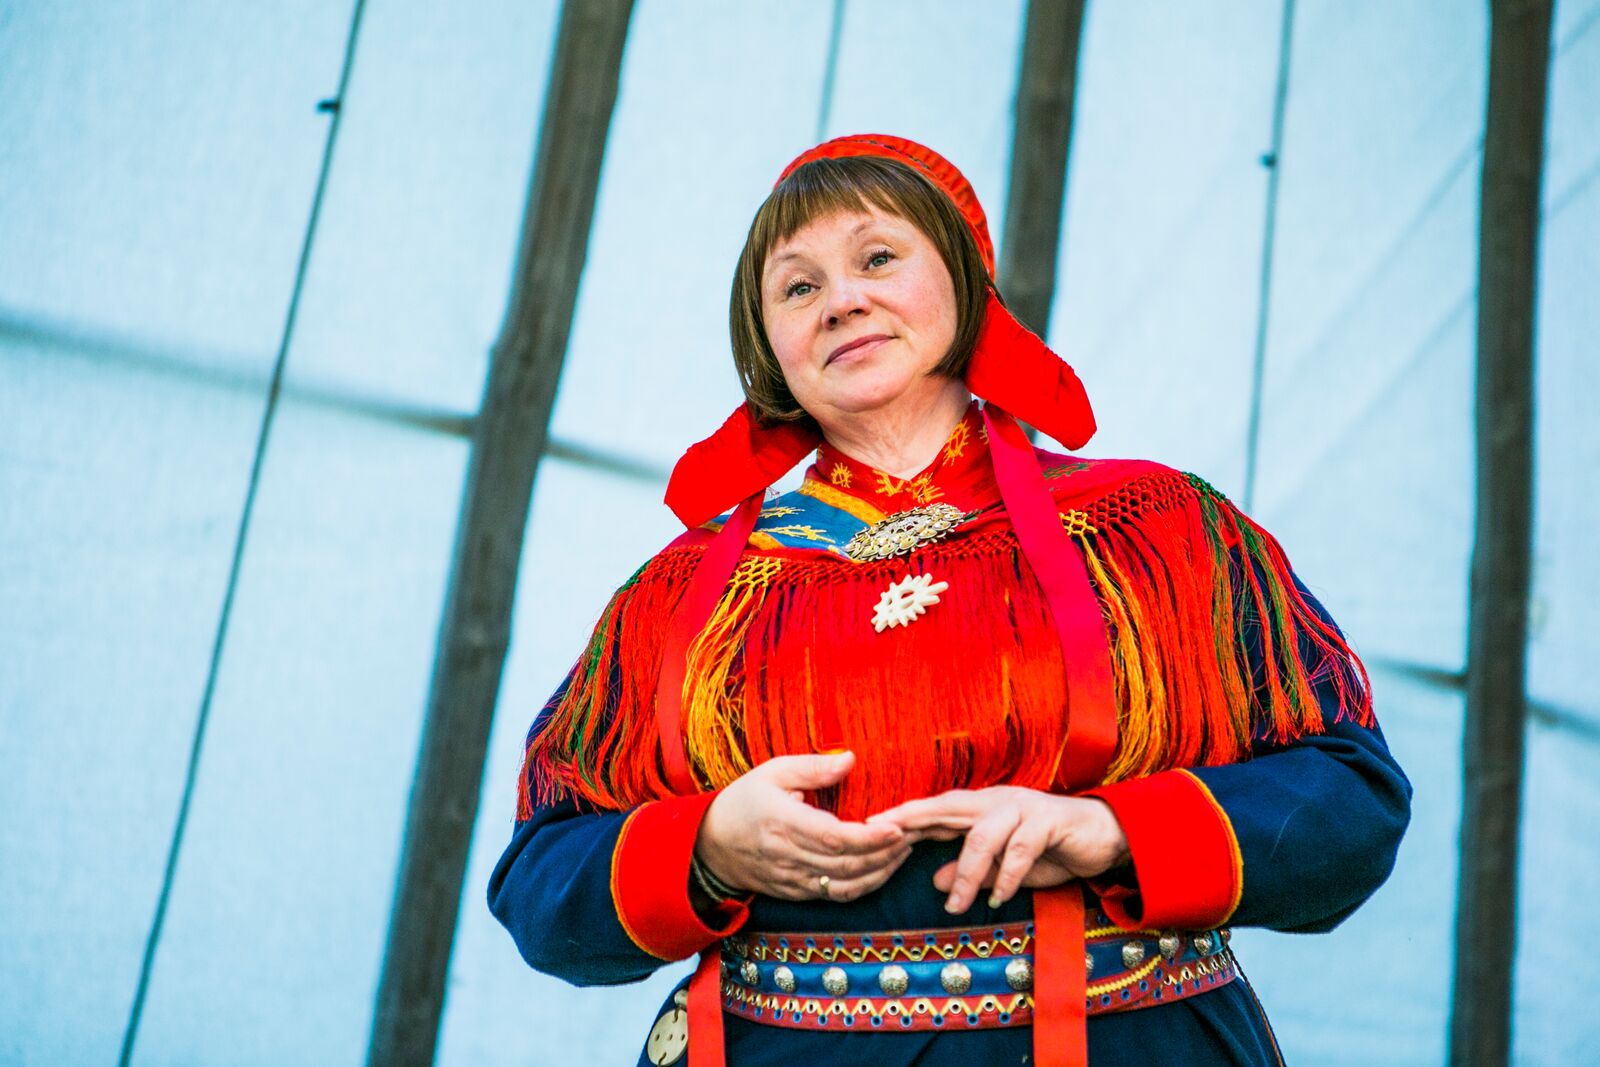 Sami woman in traditional costume. Credit and copyright: Christian Roth Christensen, VisitNorway.com